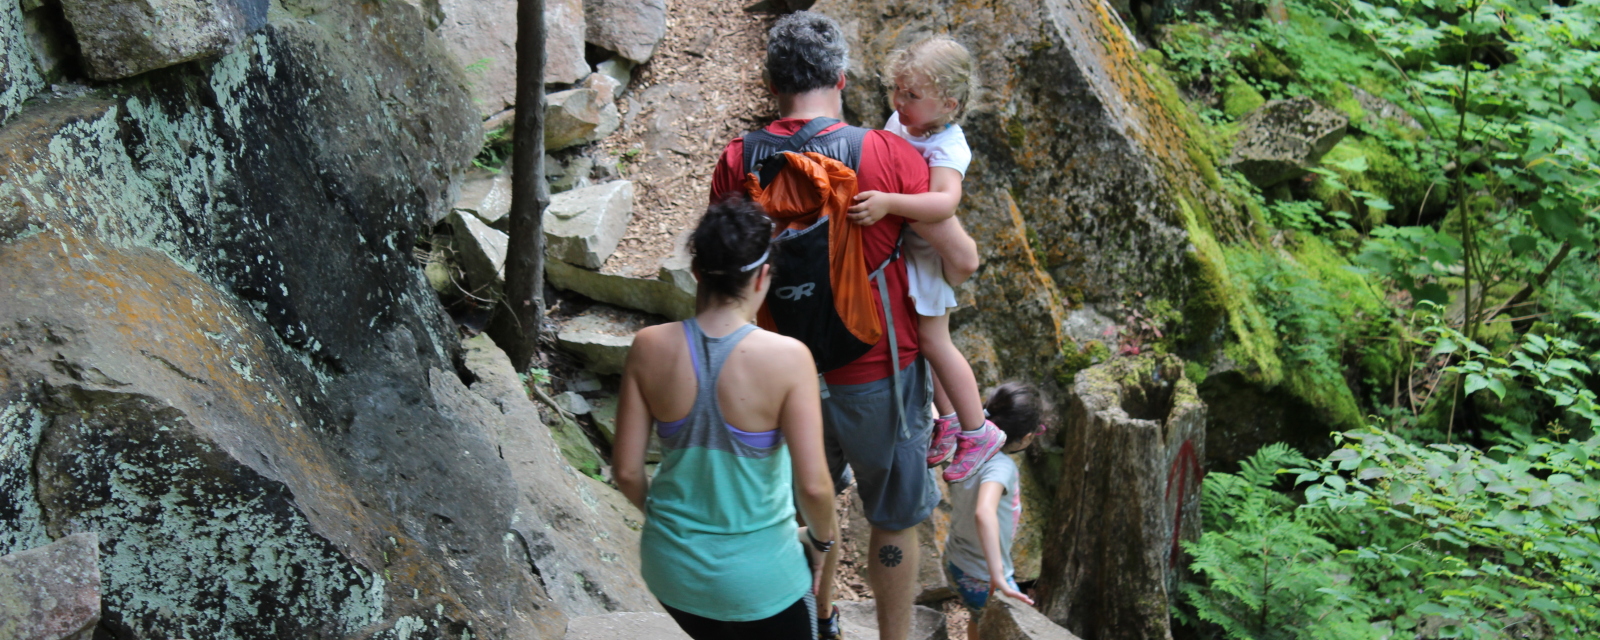 couple hiking on some rocks with their 2 children. Dad is carrying one of the kids